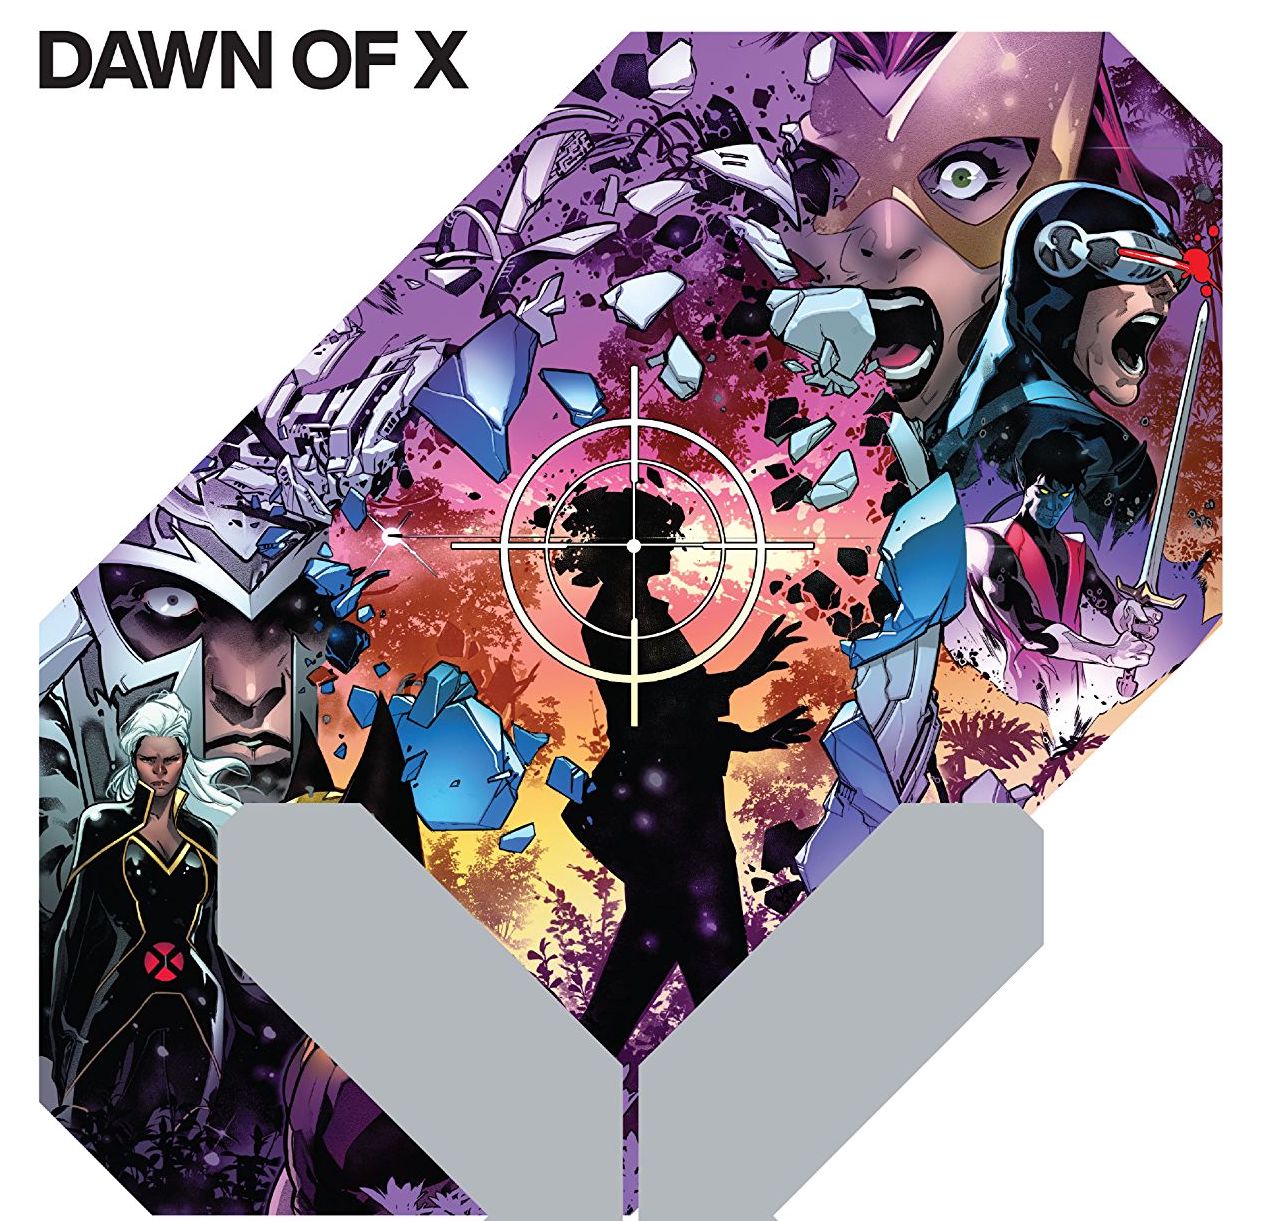 Dawn of X Vol. 2 Review